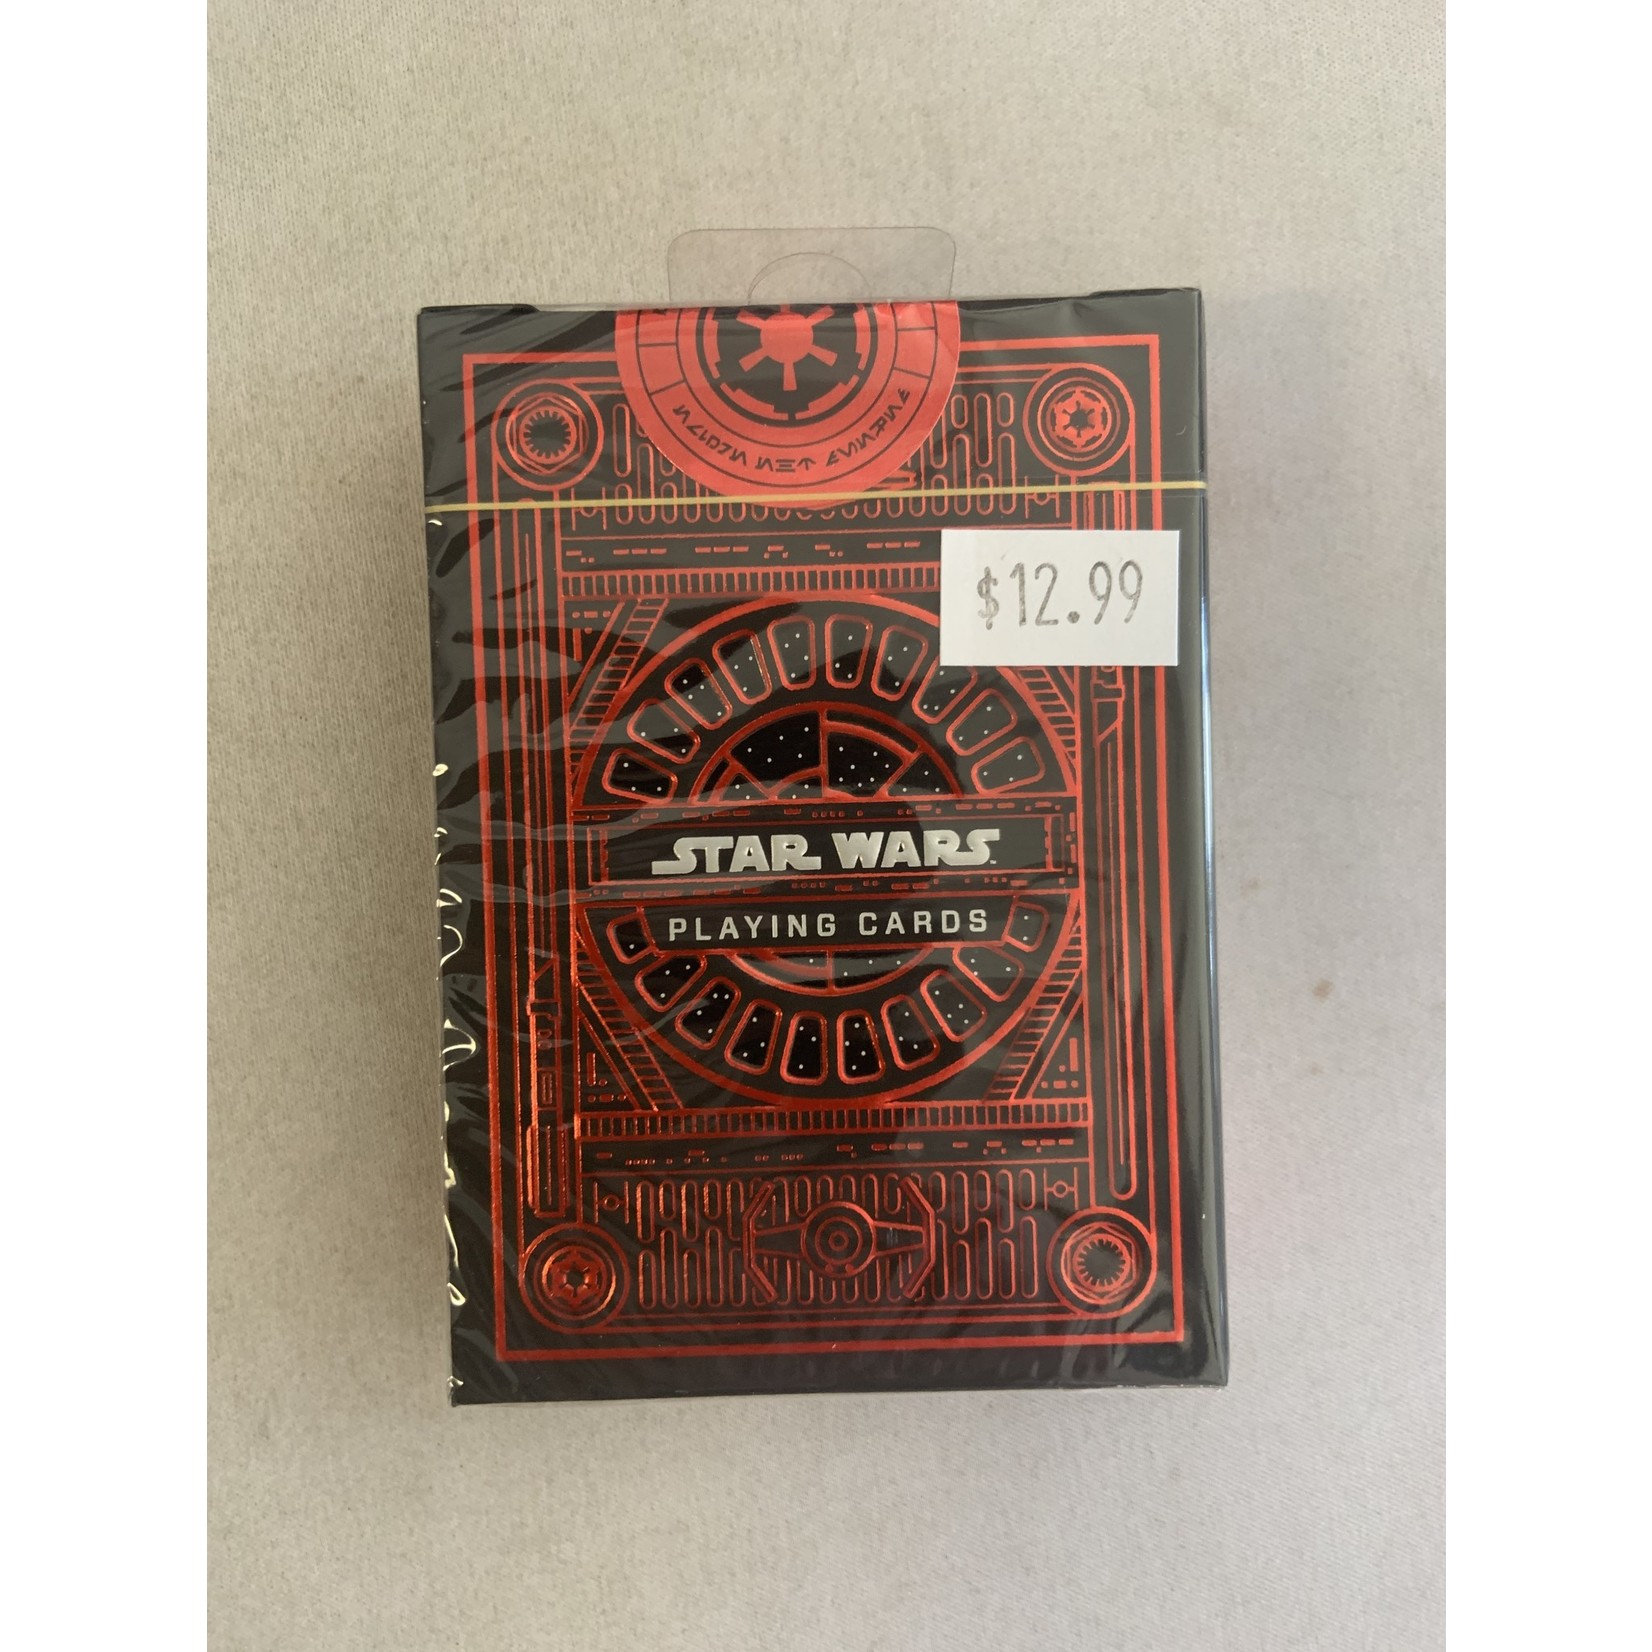 Theory 11 Theory 11 Playing Cards: SW Empire